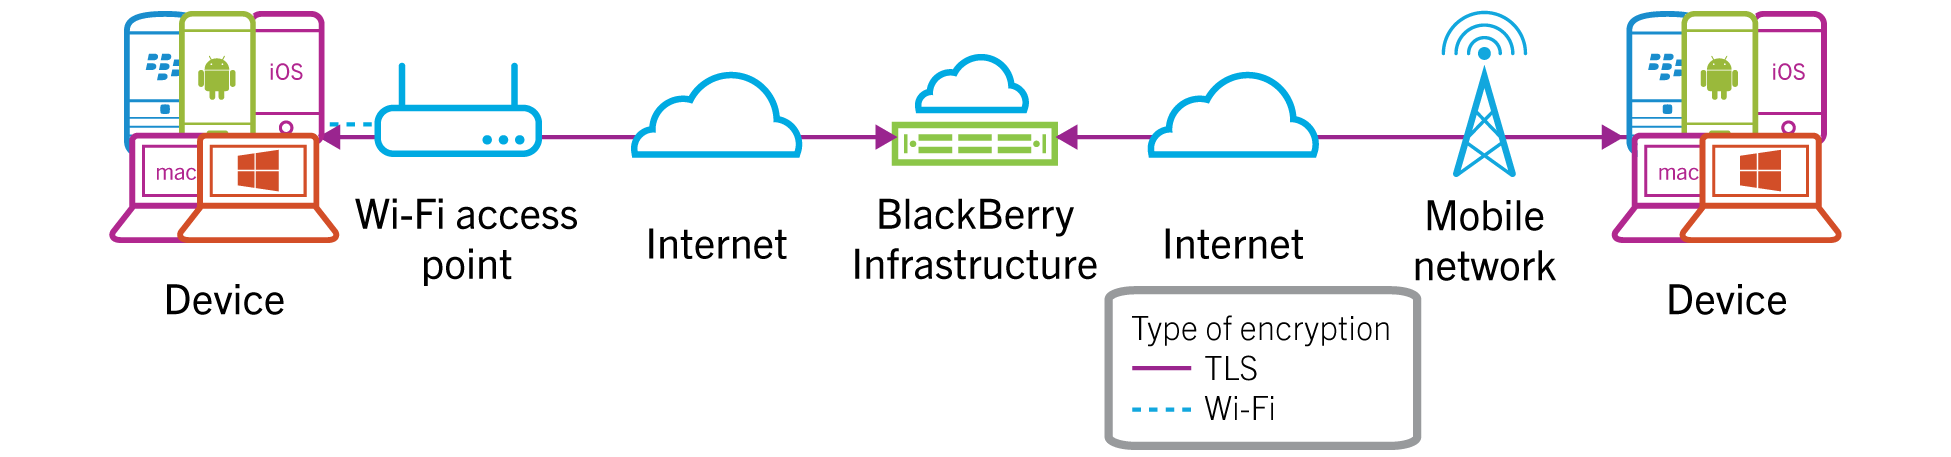 Architectural diagram showing how BBM Enterprise                        voice or video protects messages between a device on a Wi-Fi network and a device on a mobile network during call                        setup